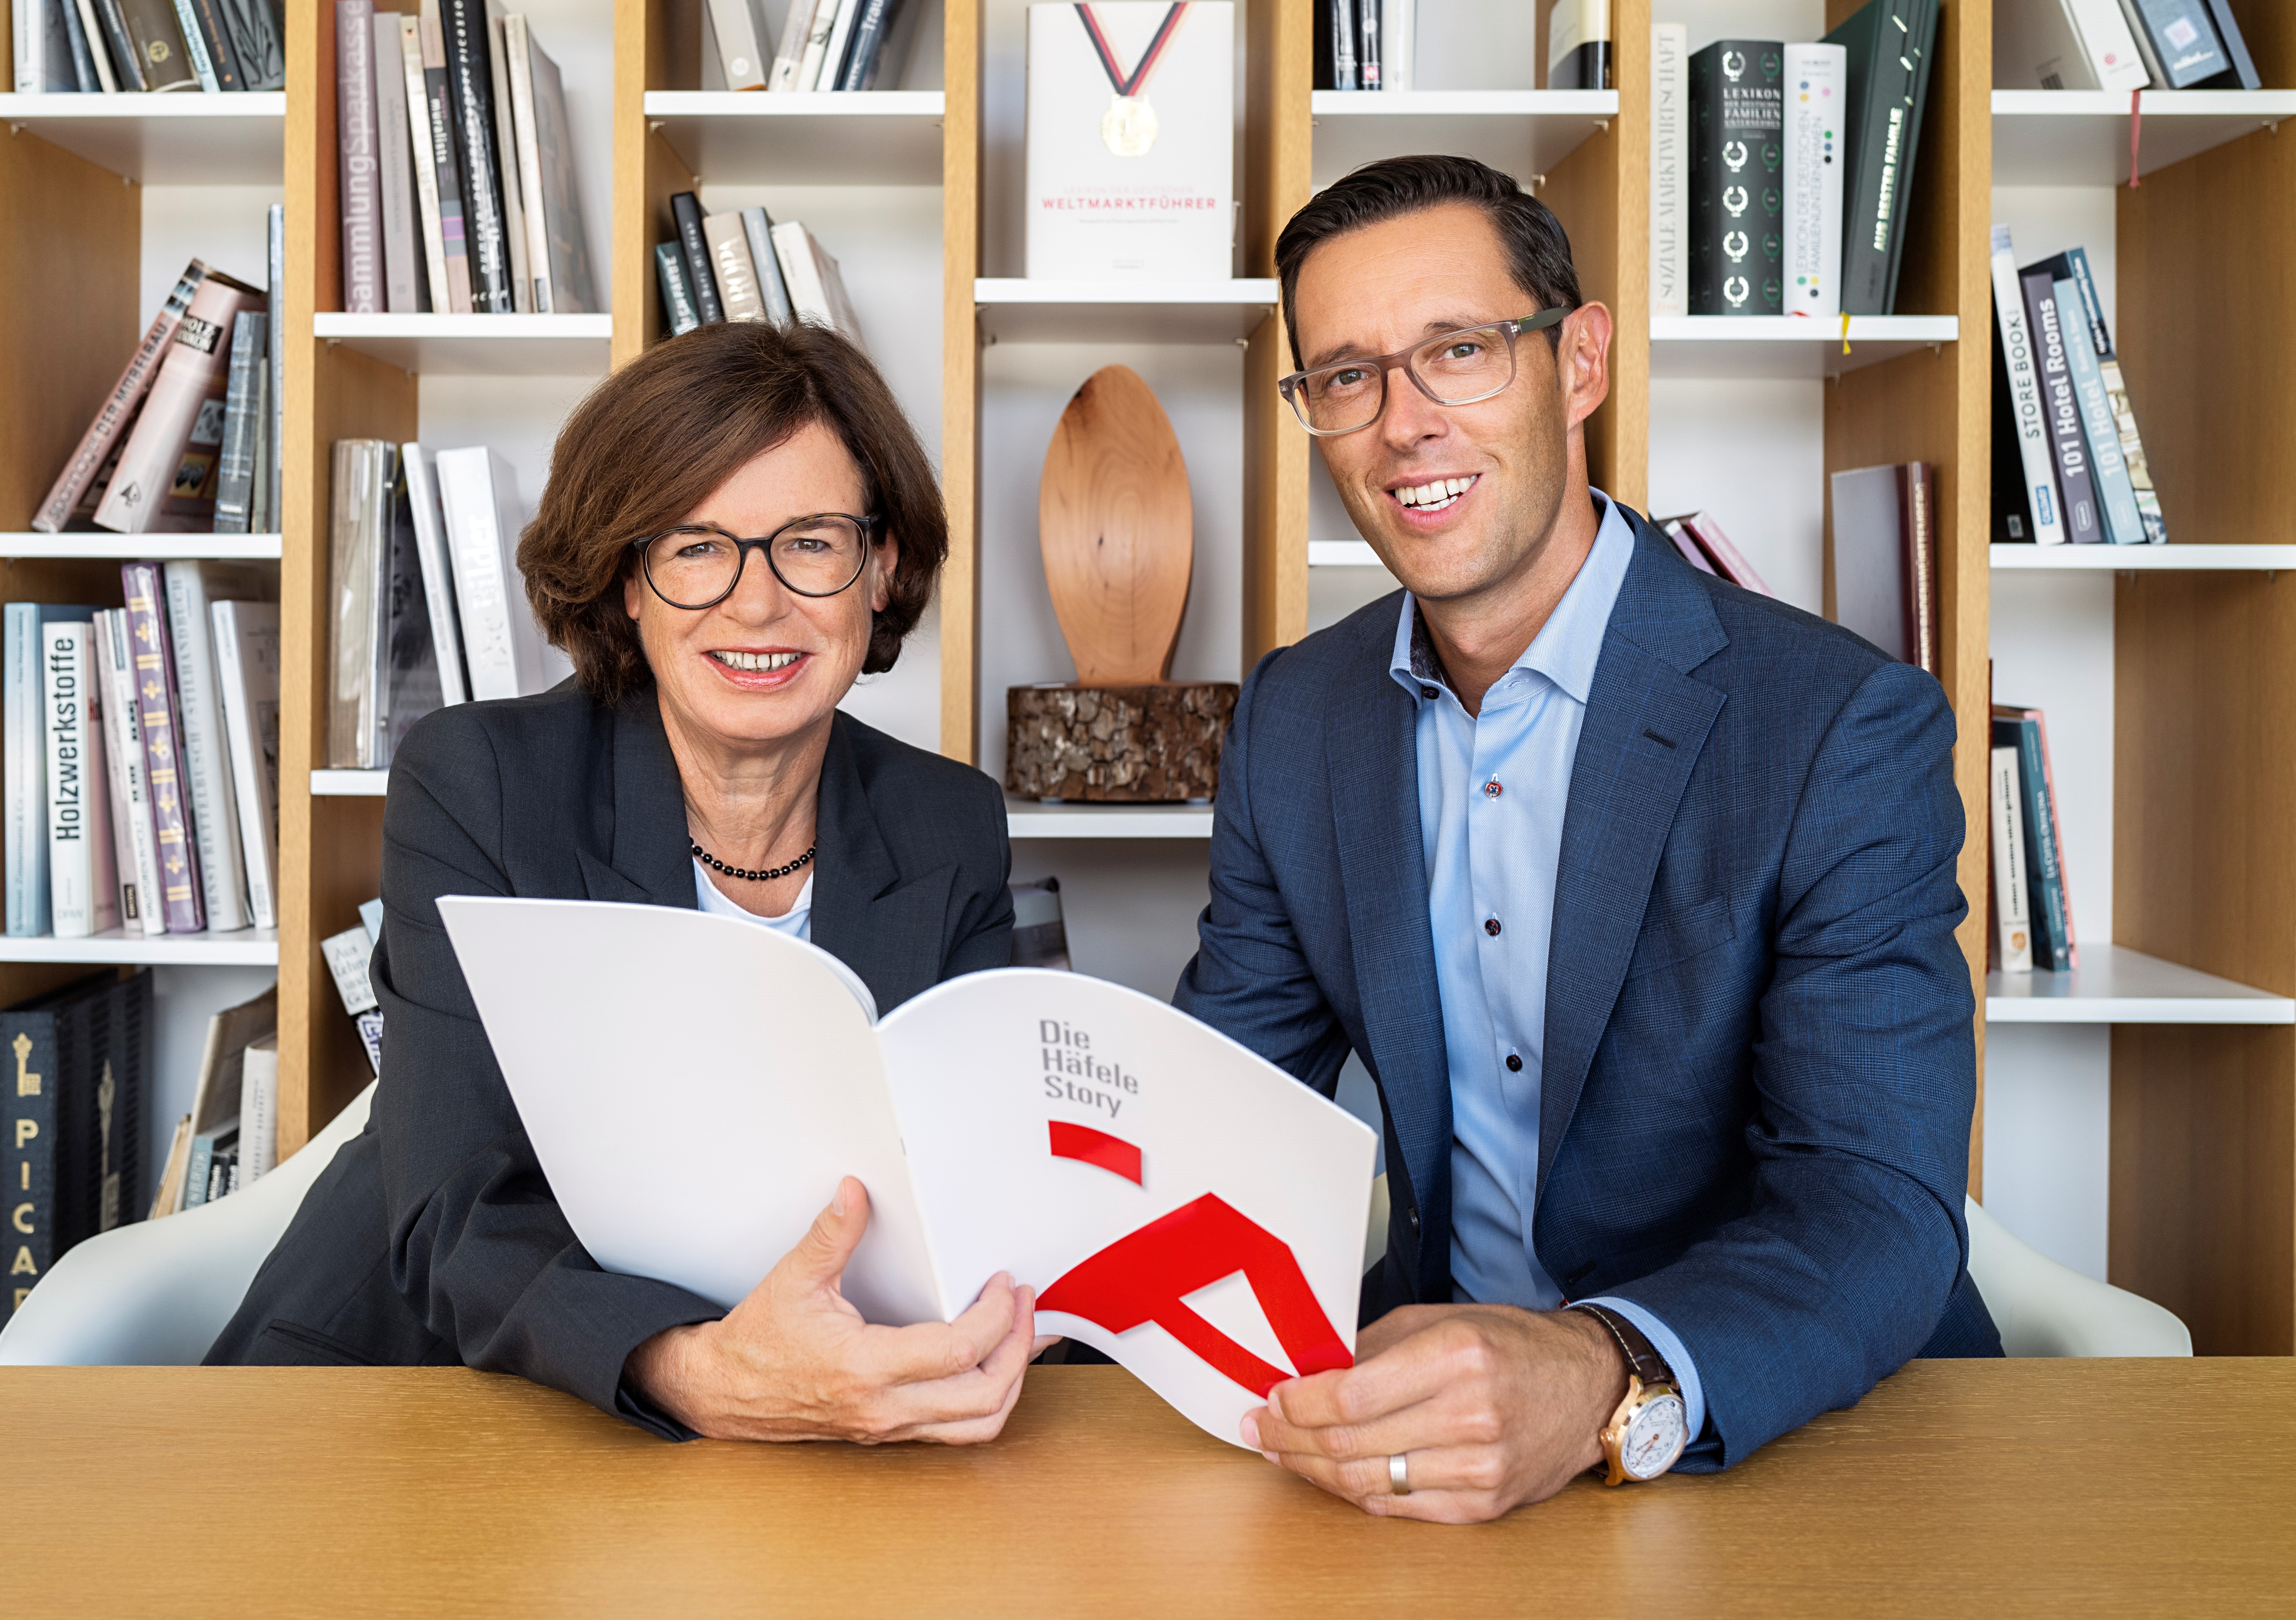 Ready for the move into the next Häfele century: After 20 years at the helm of the innovative specialist for furniture fittings and architectural hardware, electronic access control systems and LED light, Sibylle Thierer (CEO) is handing over the chair of the company management to 45-year-old managing director Gregor Riekena.